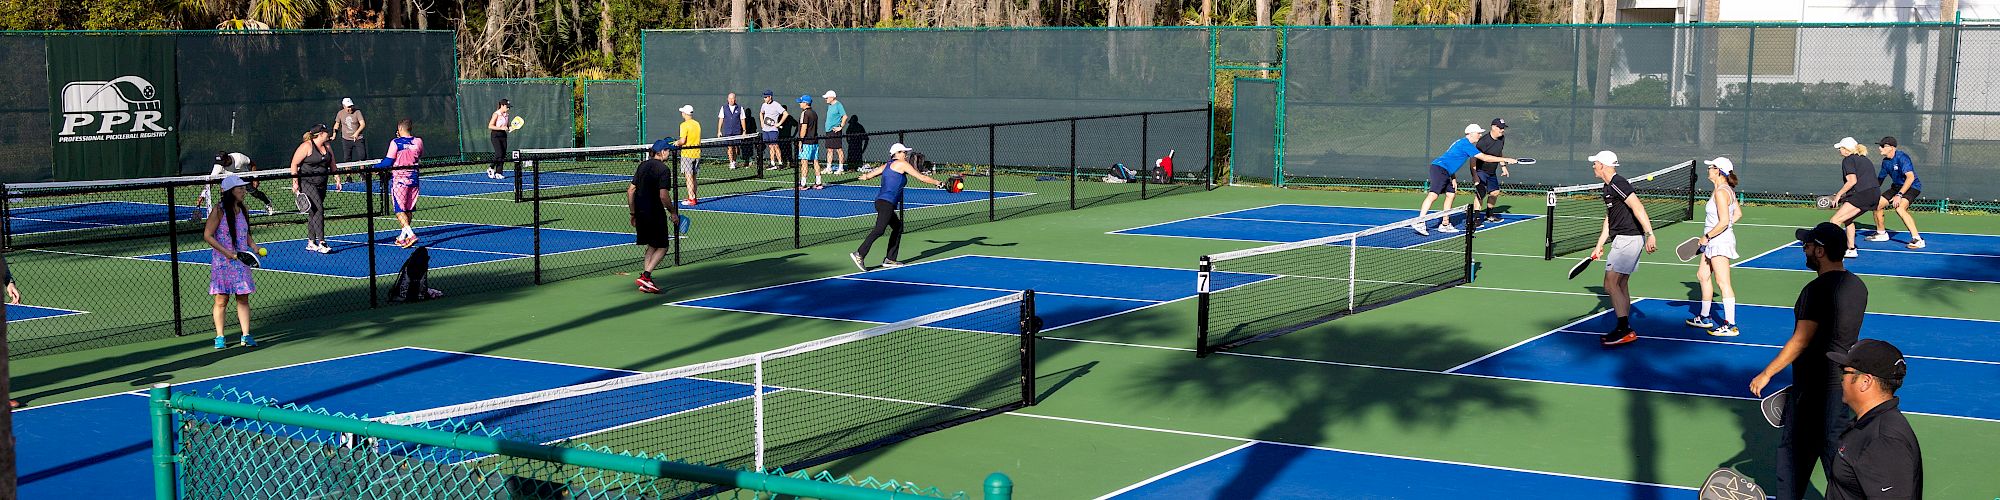 The image shows multiple people playing pickleball on several blue and green courts surrounded by a green fence and trees.